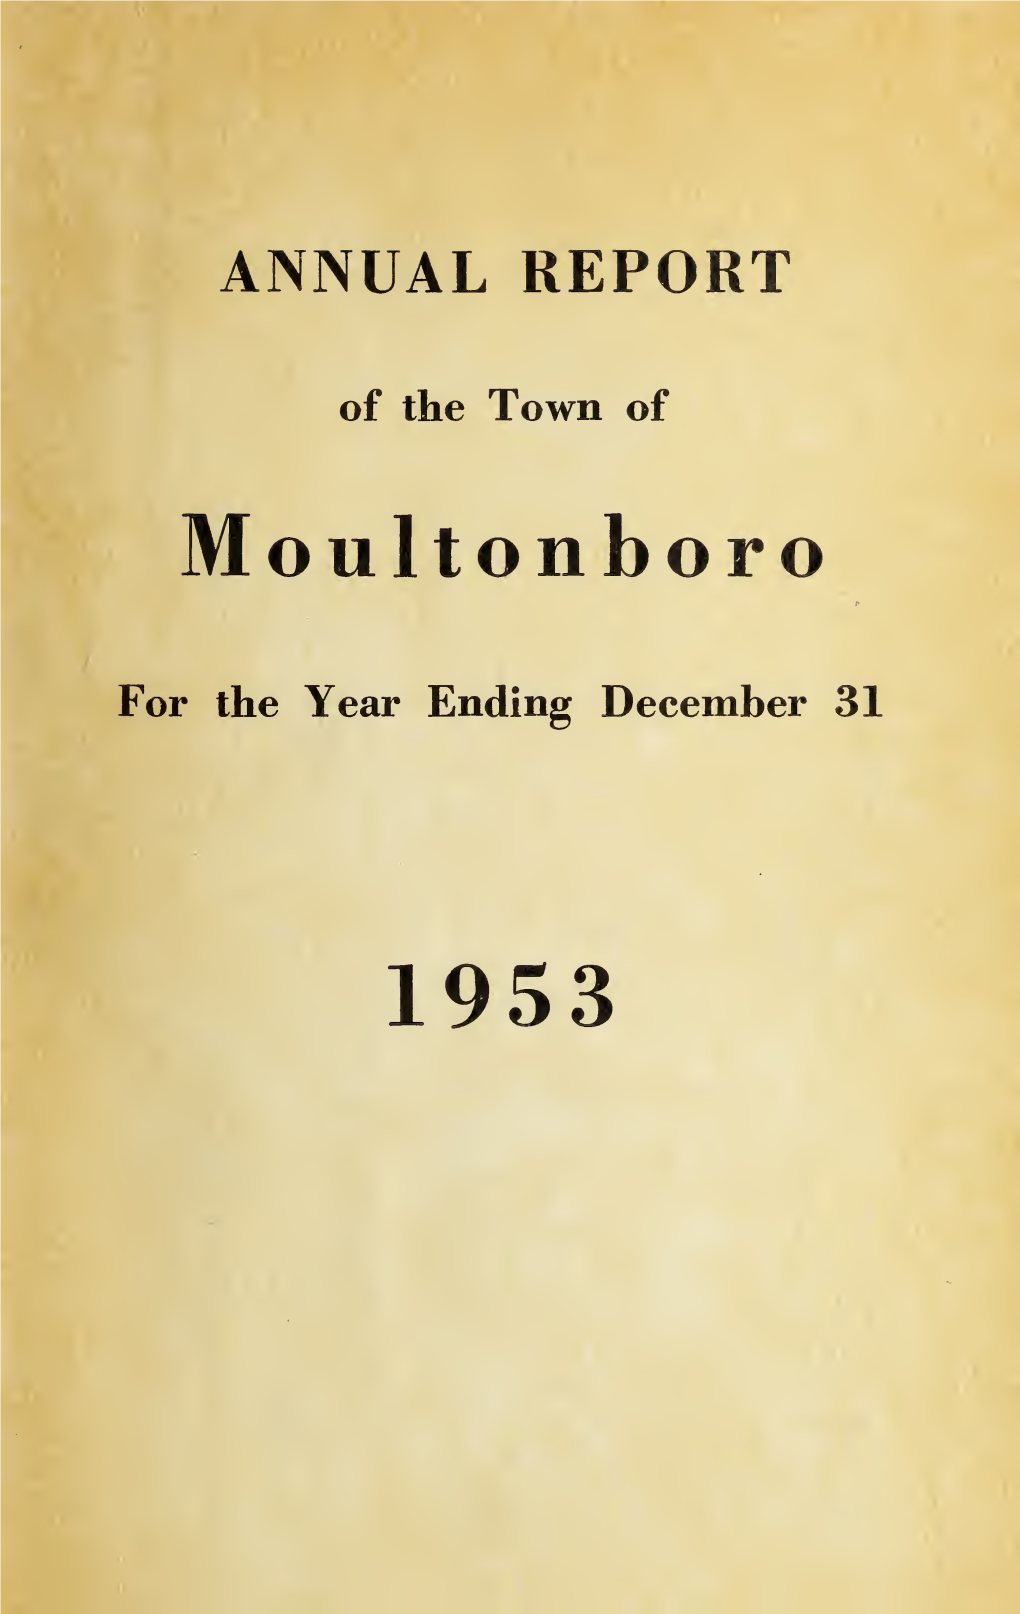 Annual Report of the Town of Moultonborough, New Hampshire